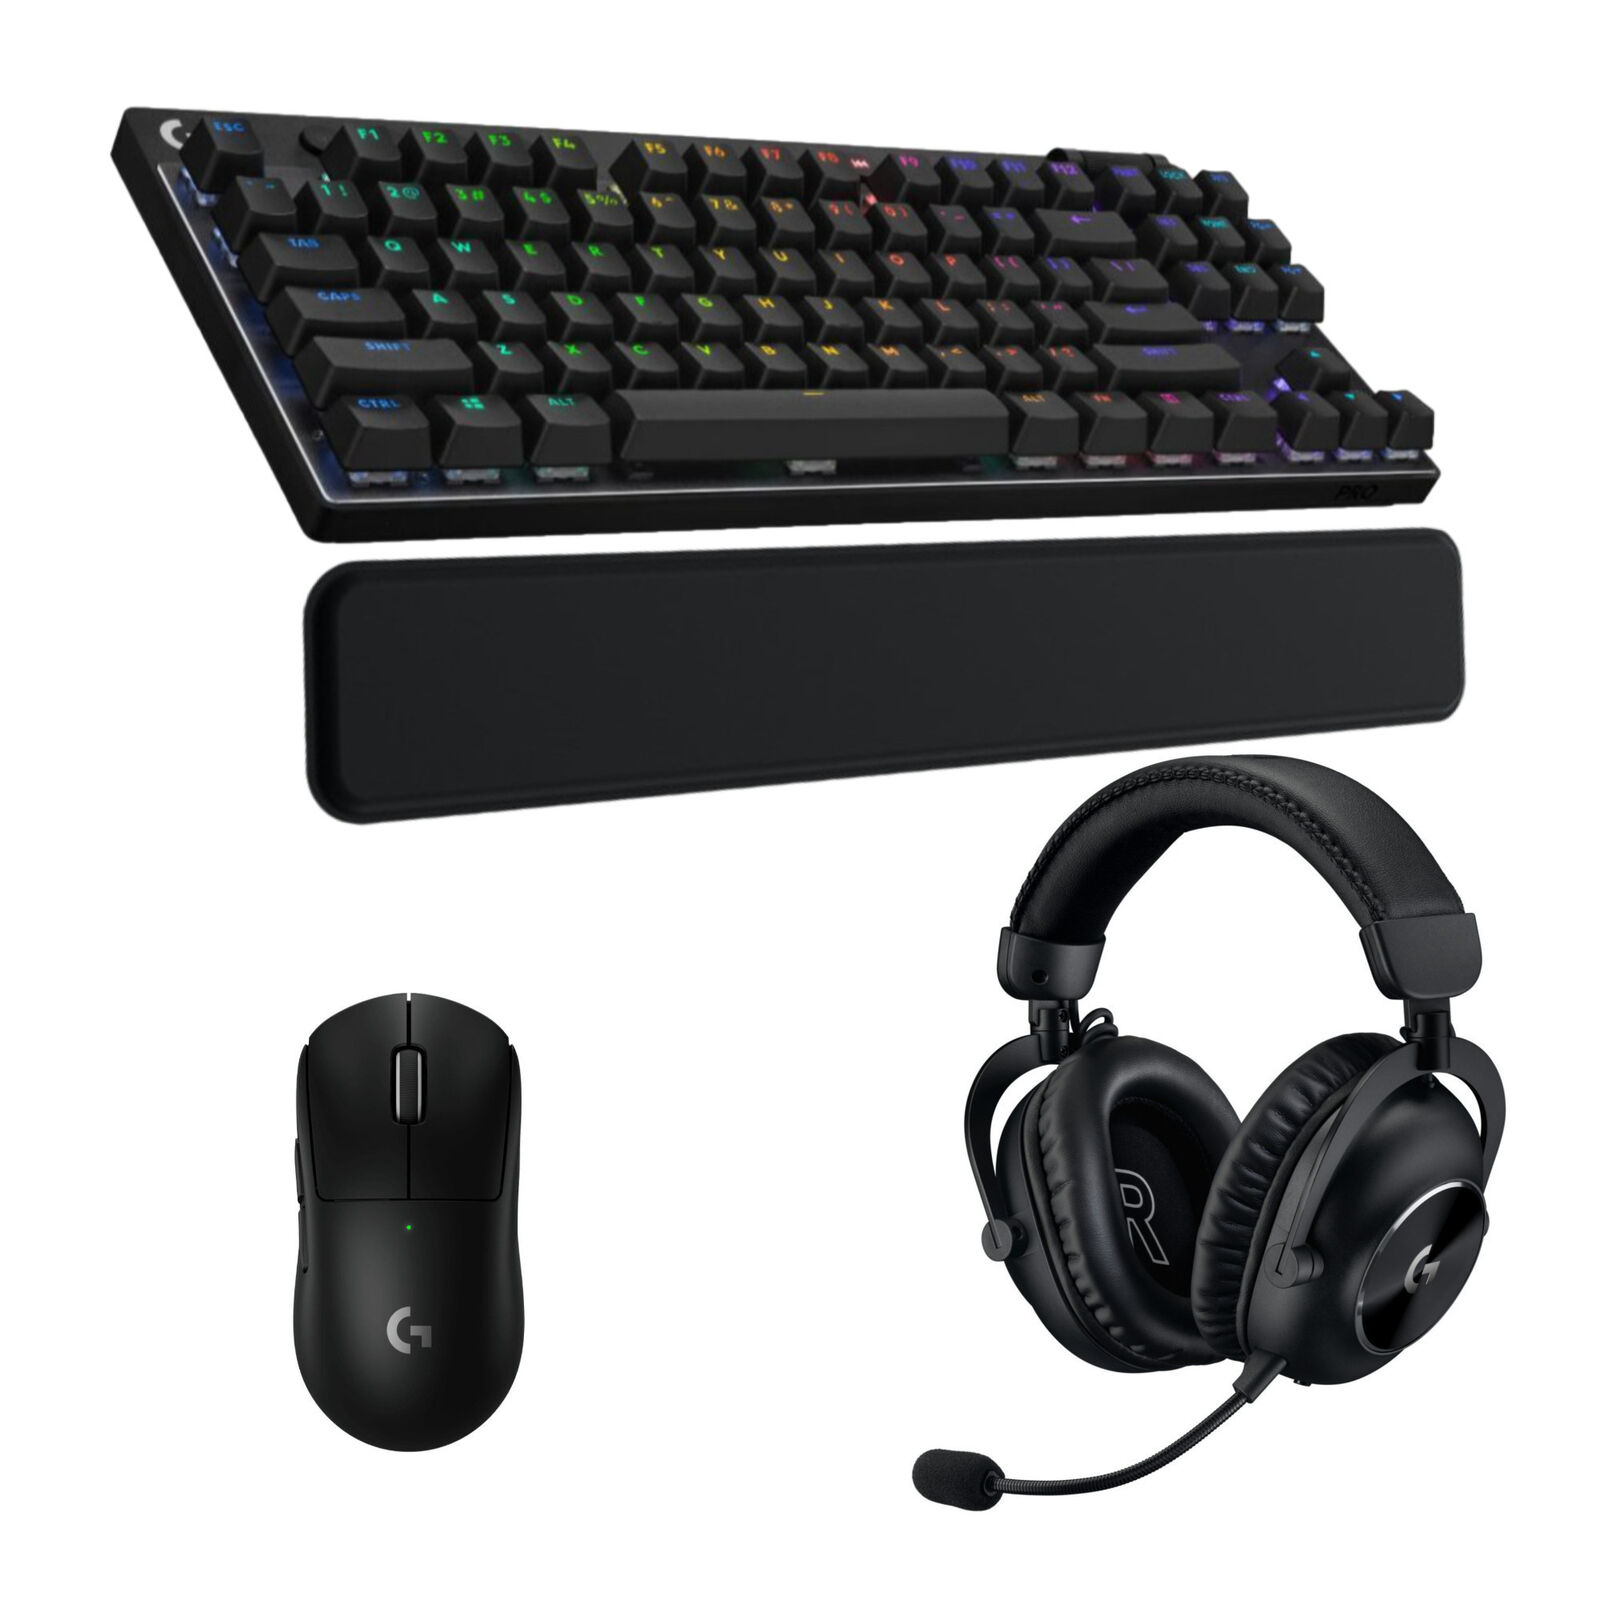 Logitech G PRO X TKL Lightspeed Wireless Keyboard with Mouse and Accessories